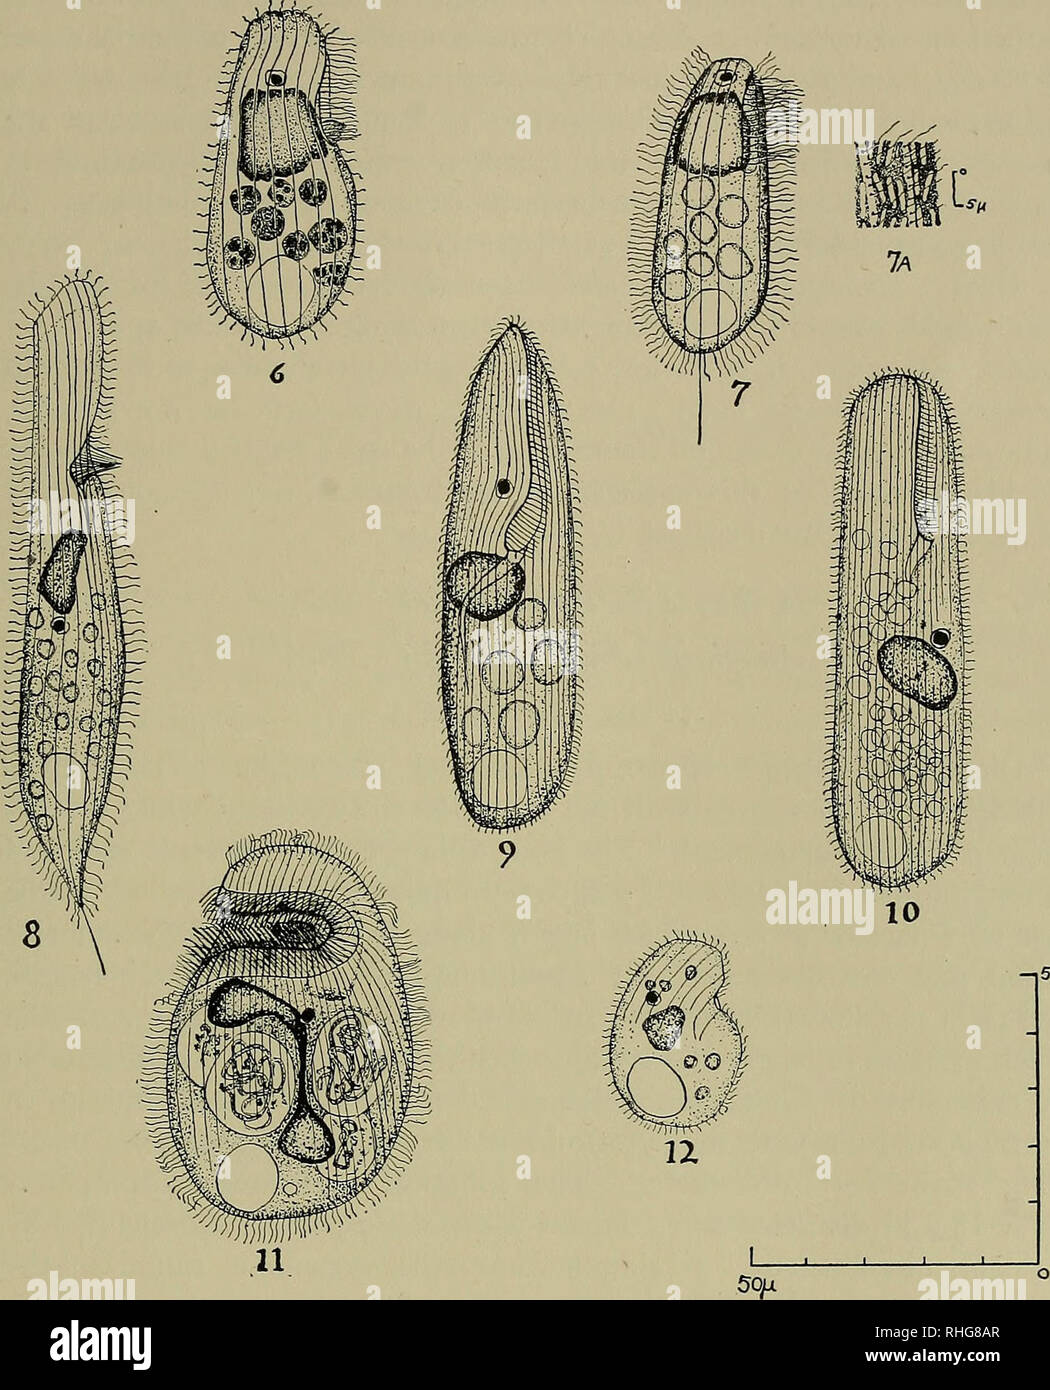 . The Biological bulletin. Biology; Zoology; Marine biology. CILIATES FROM SEA URCHINS, I Plate II 115. —,50ft. 6. Colpidium echini Russo. 7. Uronema sociale n. sp., showing general morphology; 7a. showing a portion of the pellicle illustrating the appearance of the bacteria which apply themselves to its surface. 8. Entodiscus indomitus Madsen. 9. Anophrys echini Di Mauro, view showing the cytostomal region. 10. Anophrys vermiformis n. sp. 11. Plagiopyla minuta n. sp., dorsal view. 12. Colpoda fragilis n. sp., dorsal view.. Please note that these images are extracted from scanned page images t Stock Photo